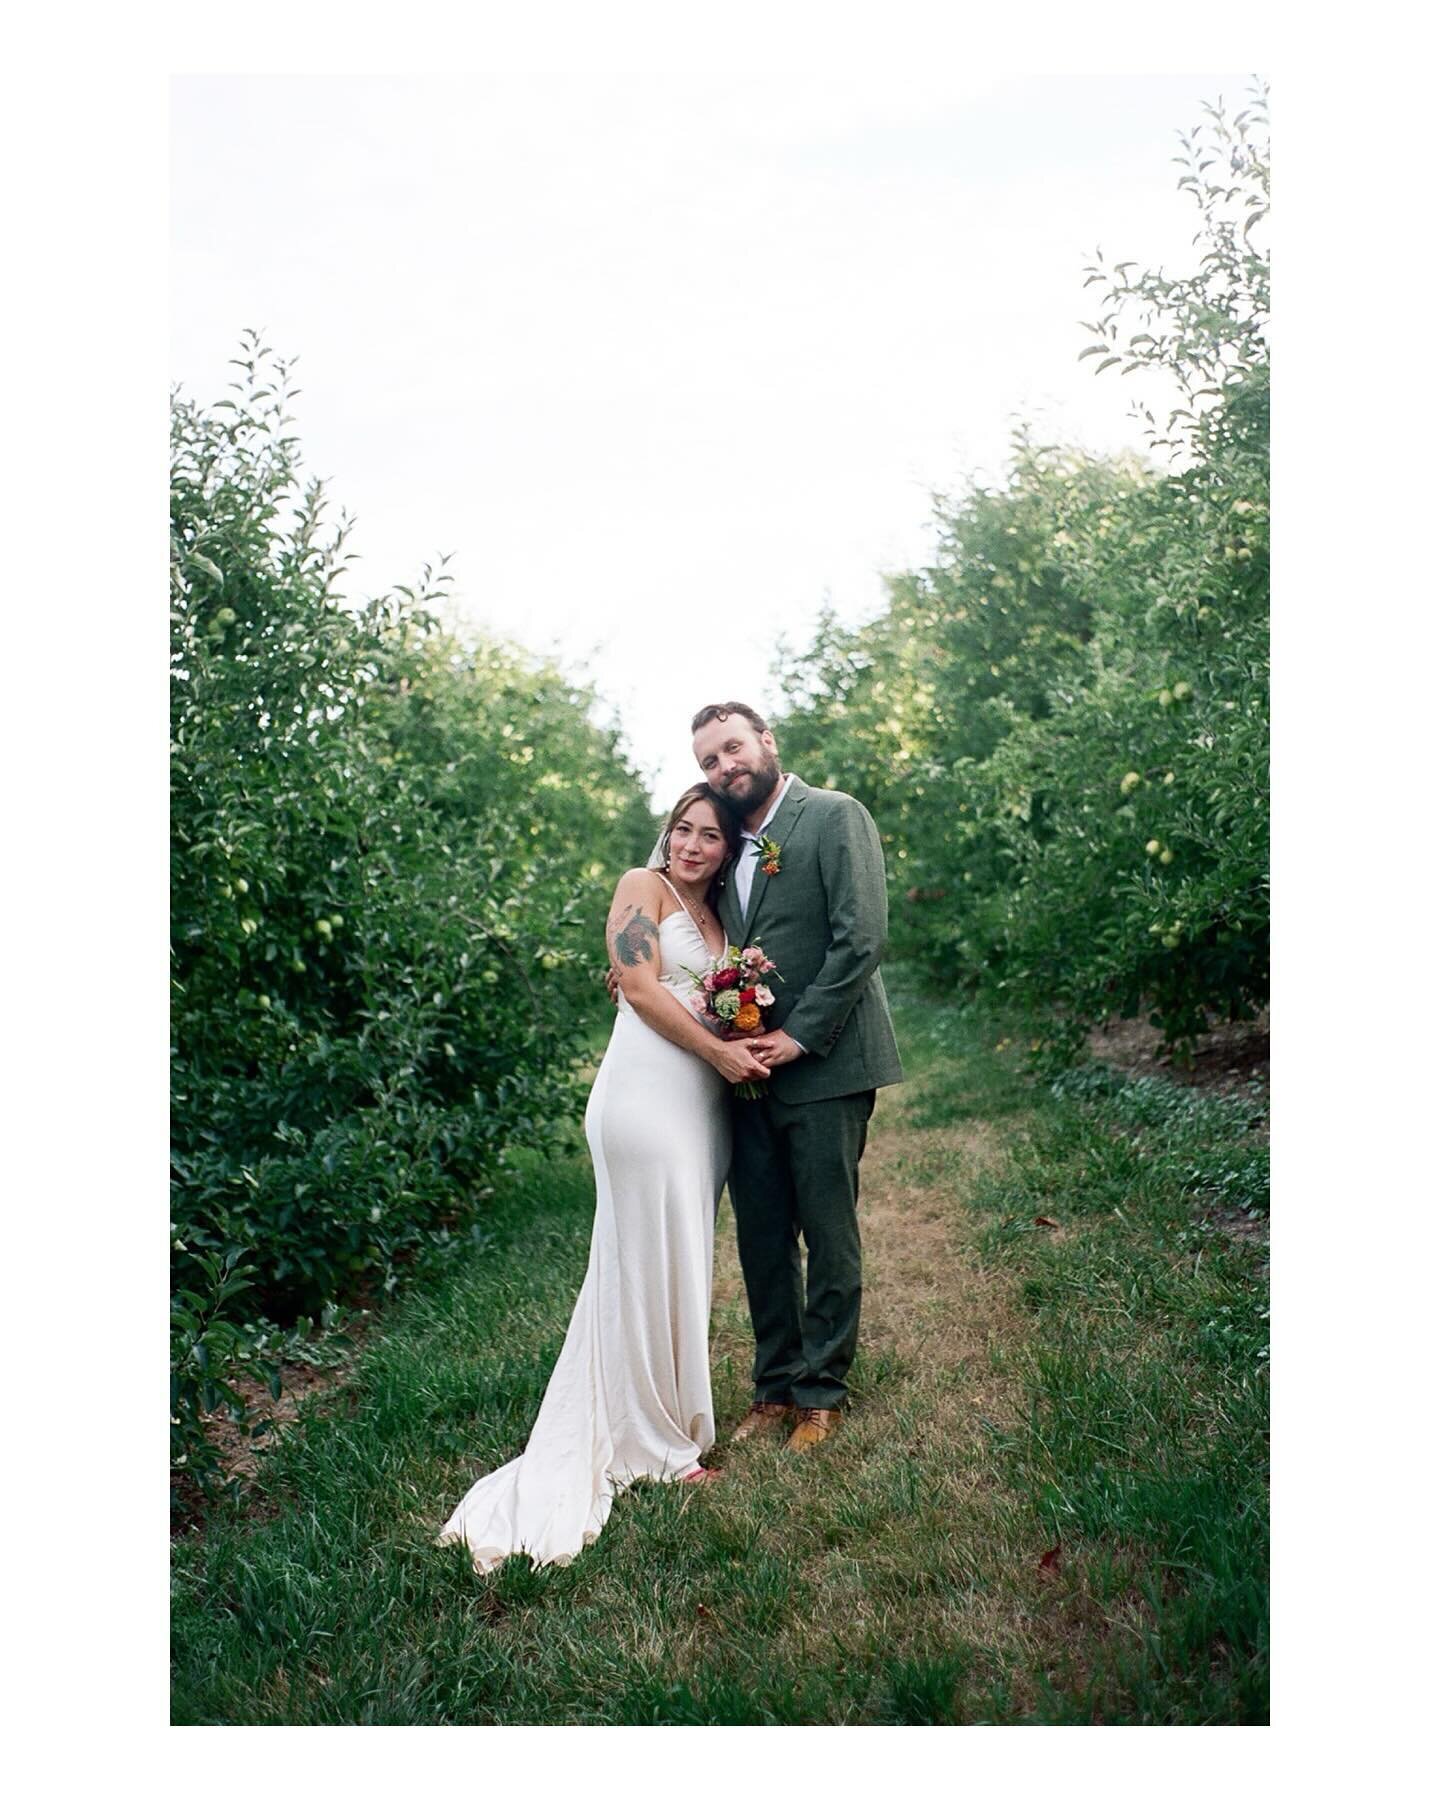 Excited for the warmer days ahead and all the love-filled celebrations to come! Who else is looking forward to spring and summer weddings? For now, we&rsquo;re reminiscing on C+B&rsquo;s Showalter&rsquo;s Orchard and Greenhouse wedding full of sunshi